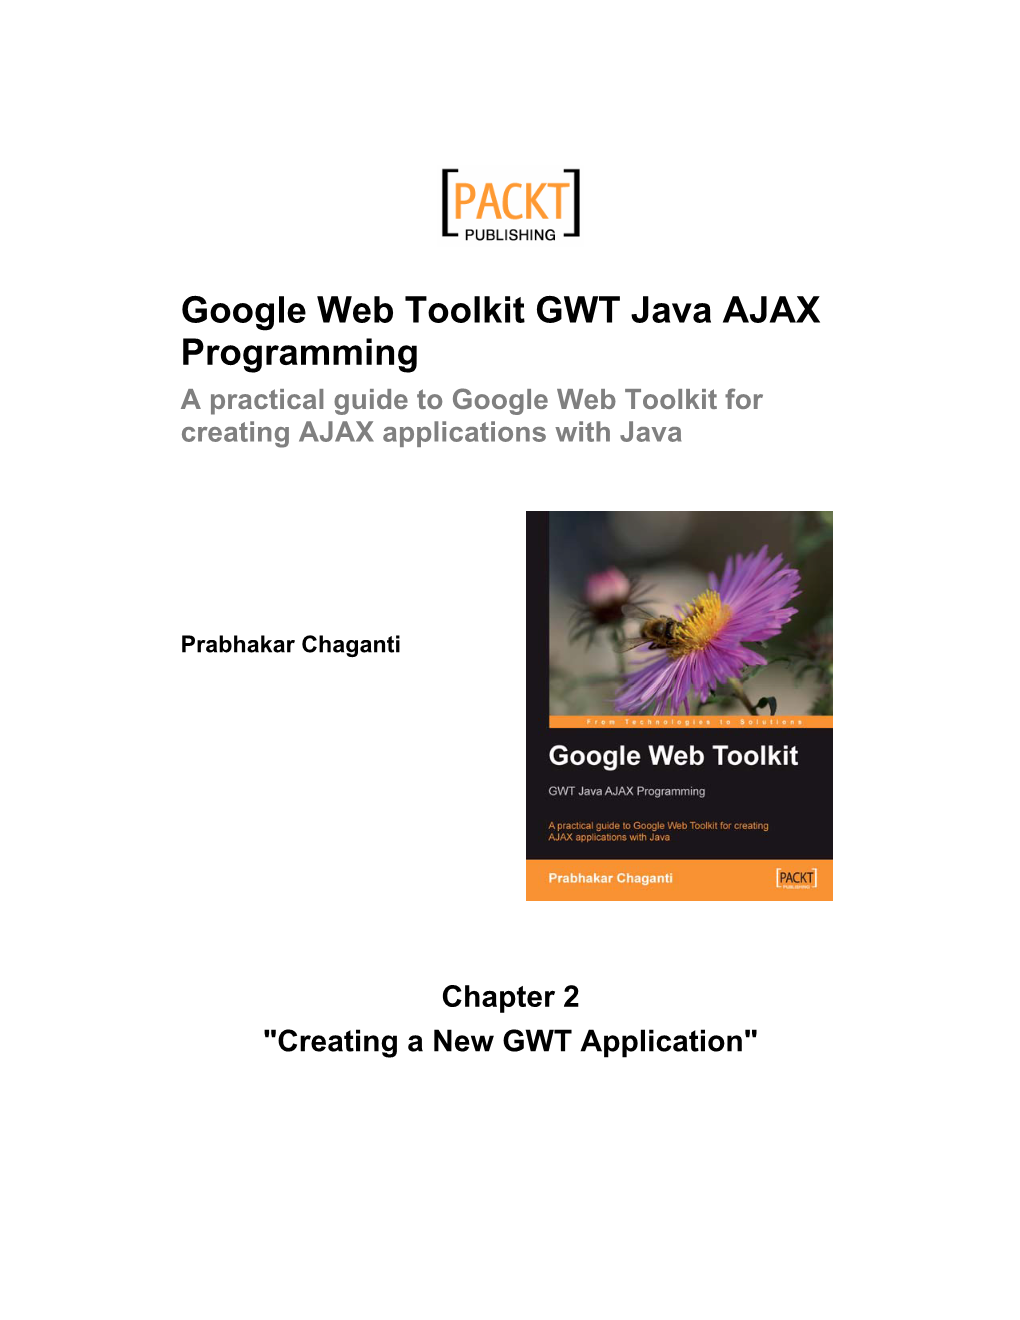 Google Web Toolkit GWT Java AJAX Programming a Practical Guide to Google Web Toolkit for Creating AJAX Applications with Java